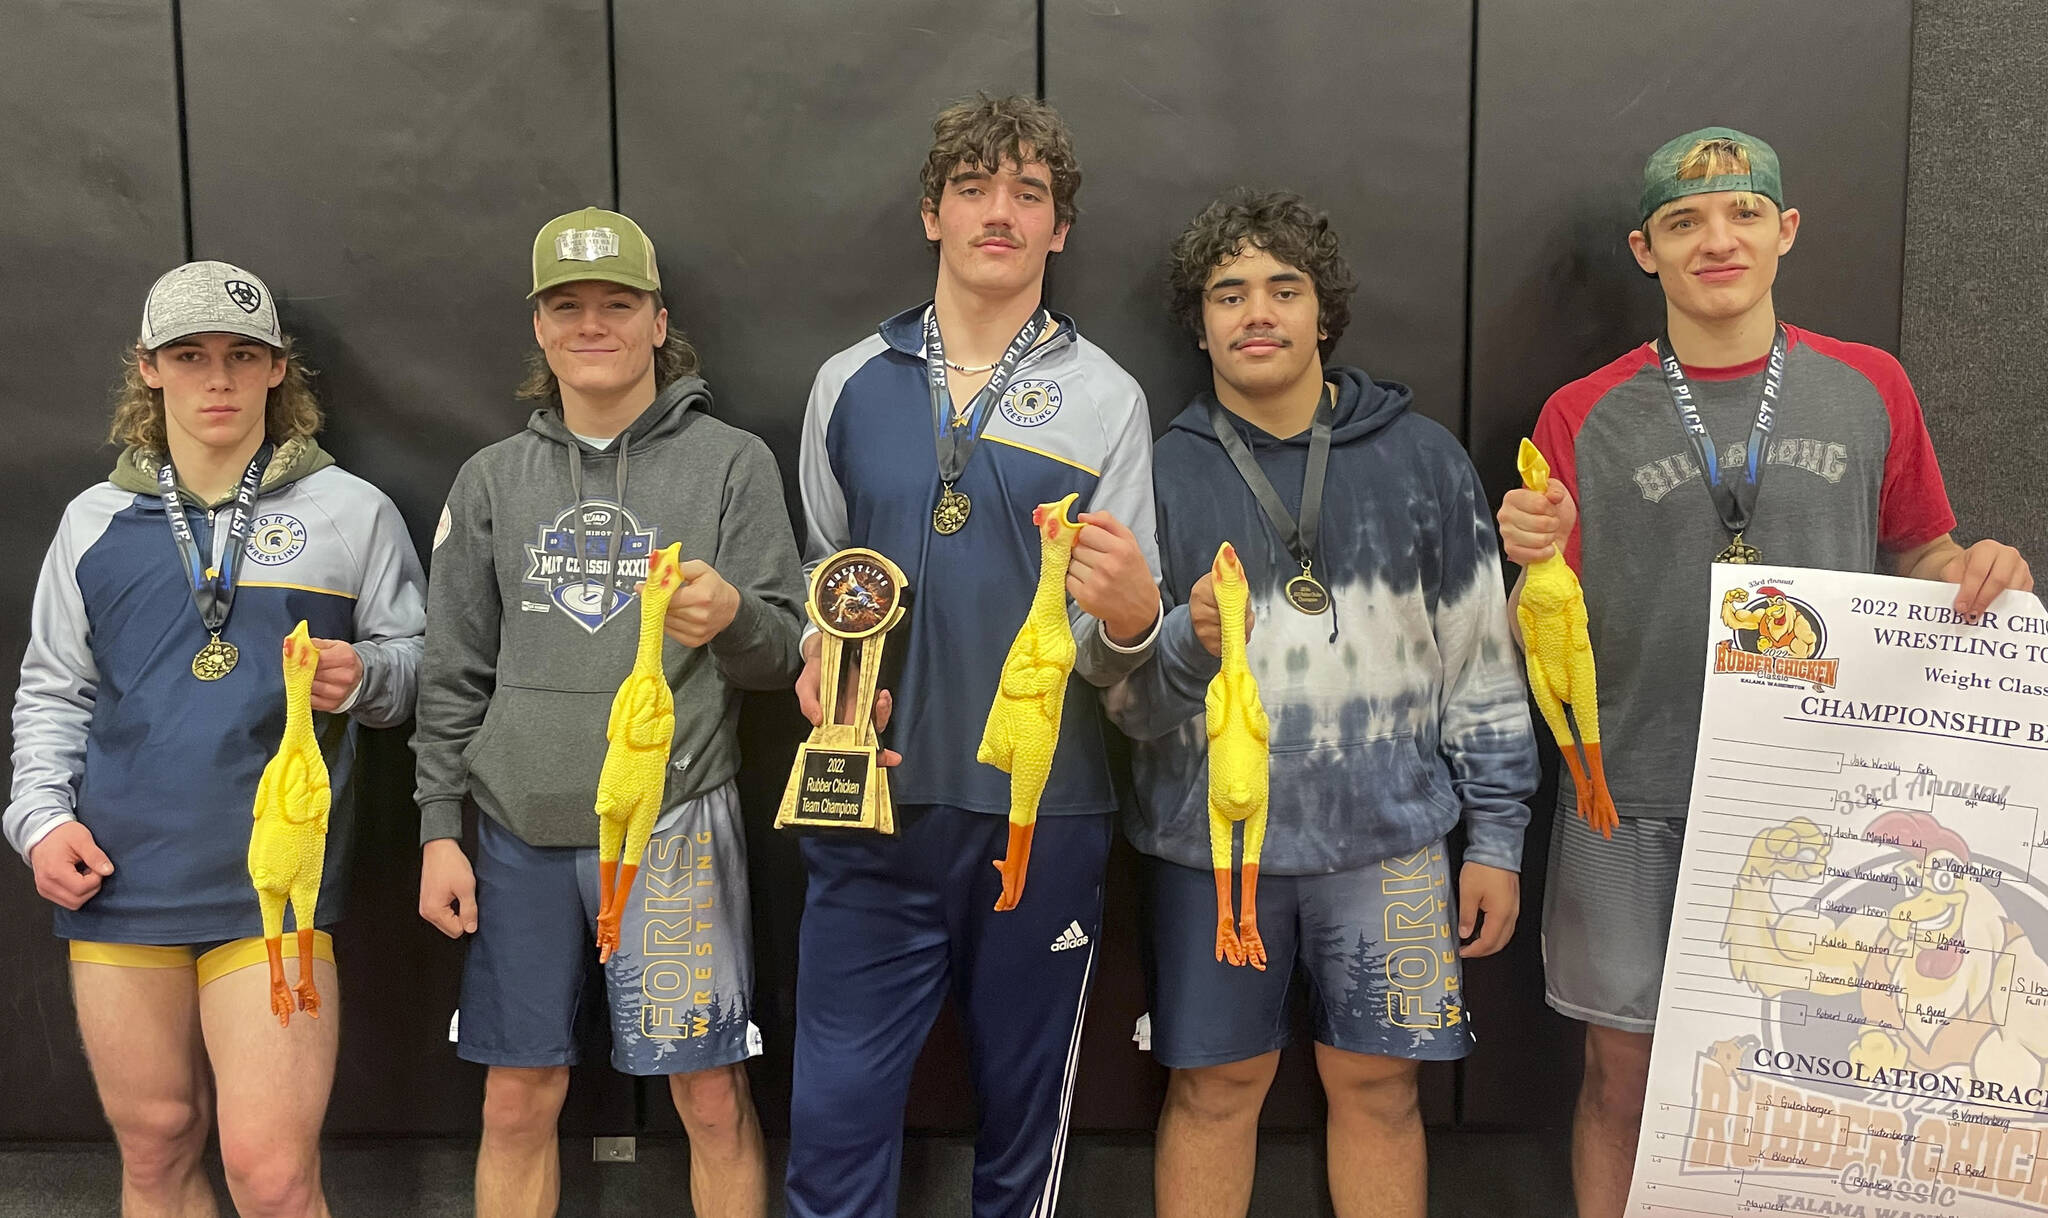 The individual champs from left to right are: Walker Wheeler 138, Dalton Kilmer 132, Hayden Queen 182, Sloan Tumaua 220, Jake Weakley 152. Submitted Photo